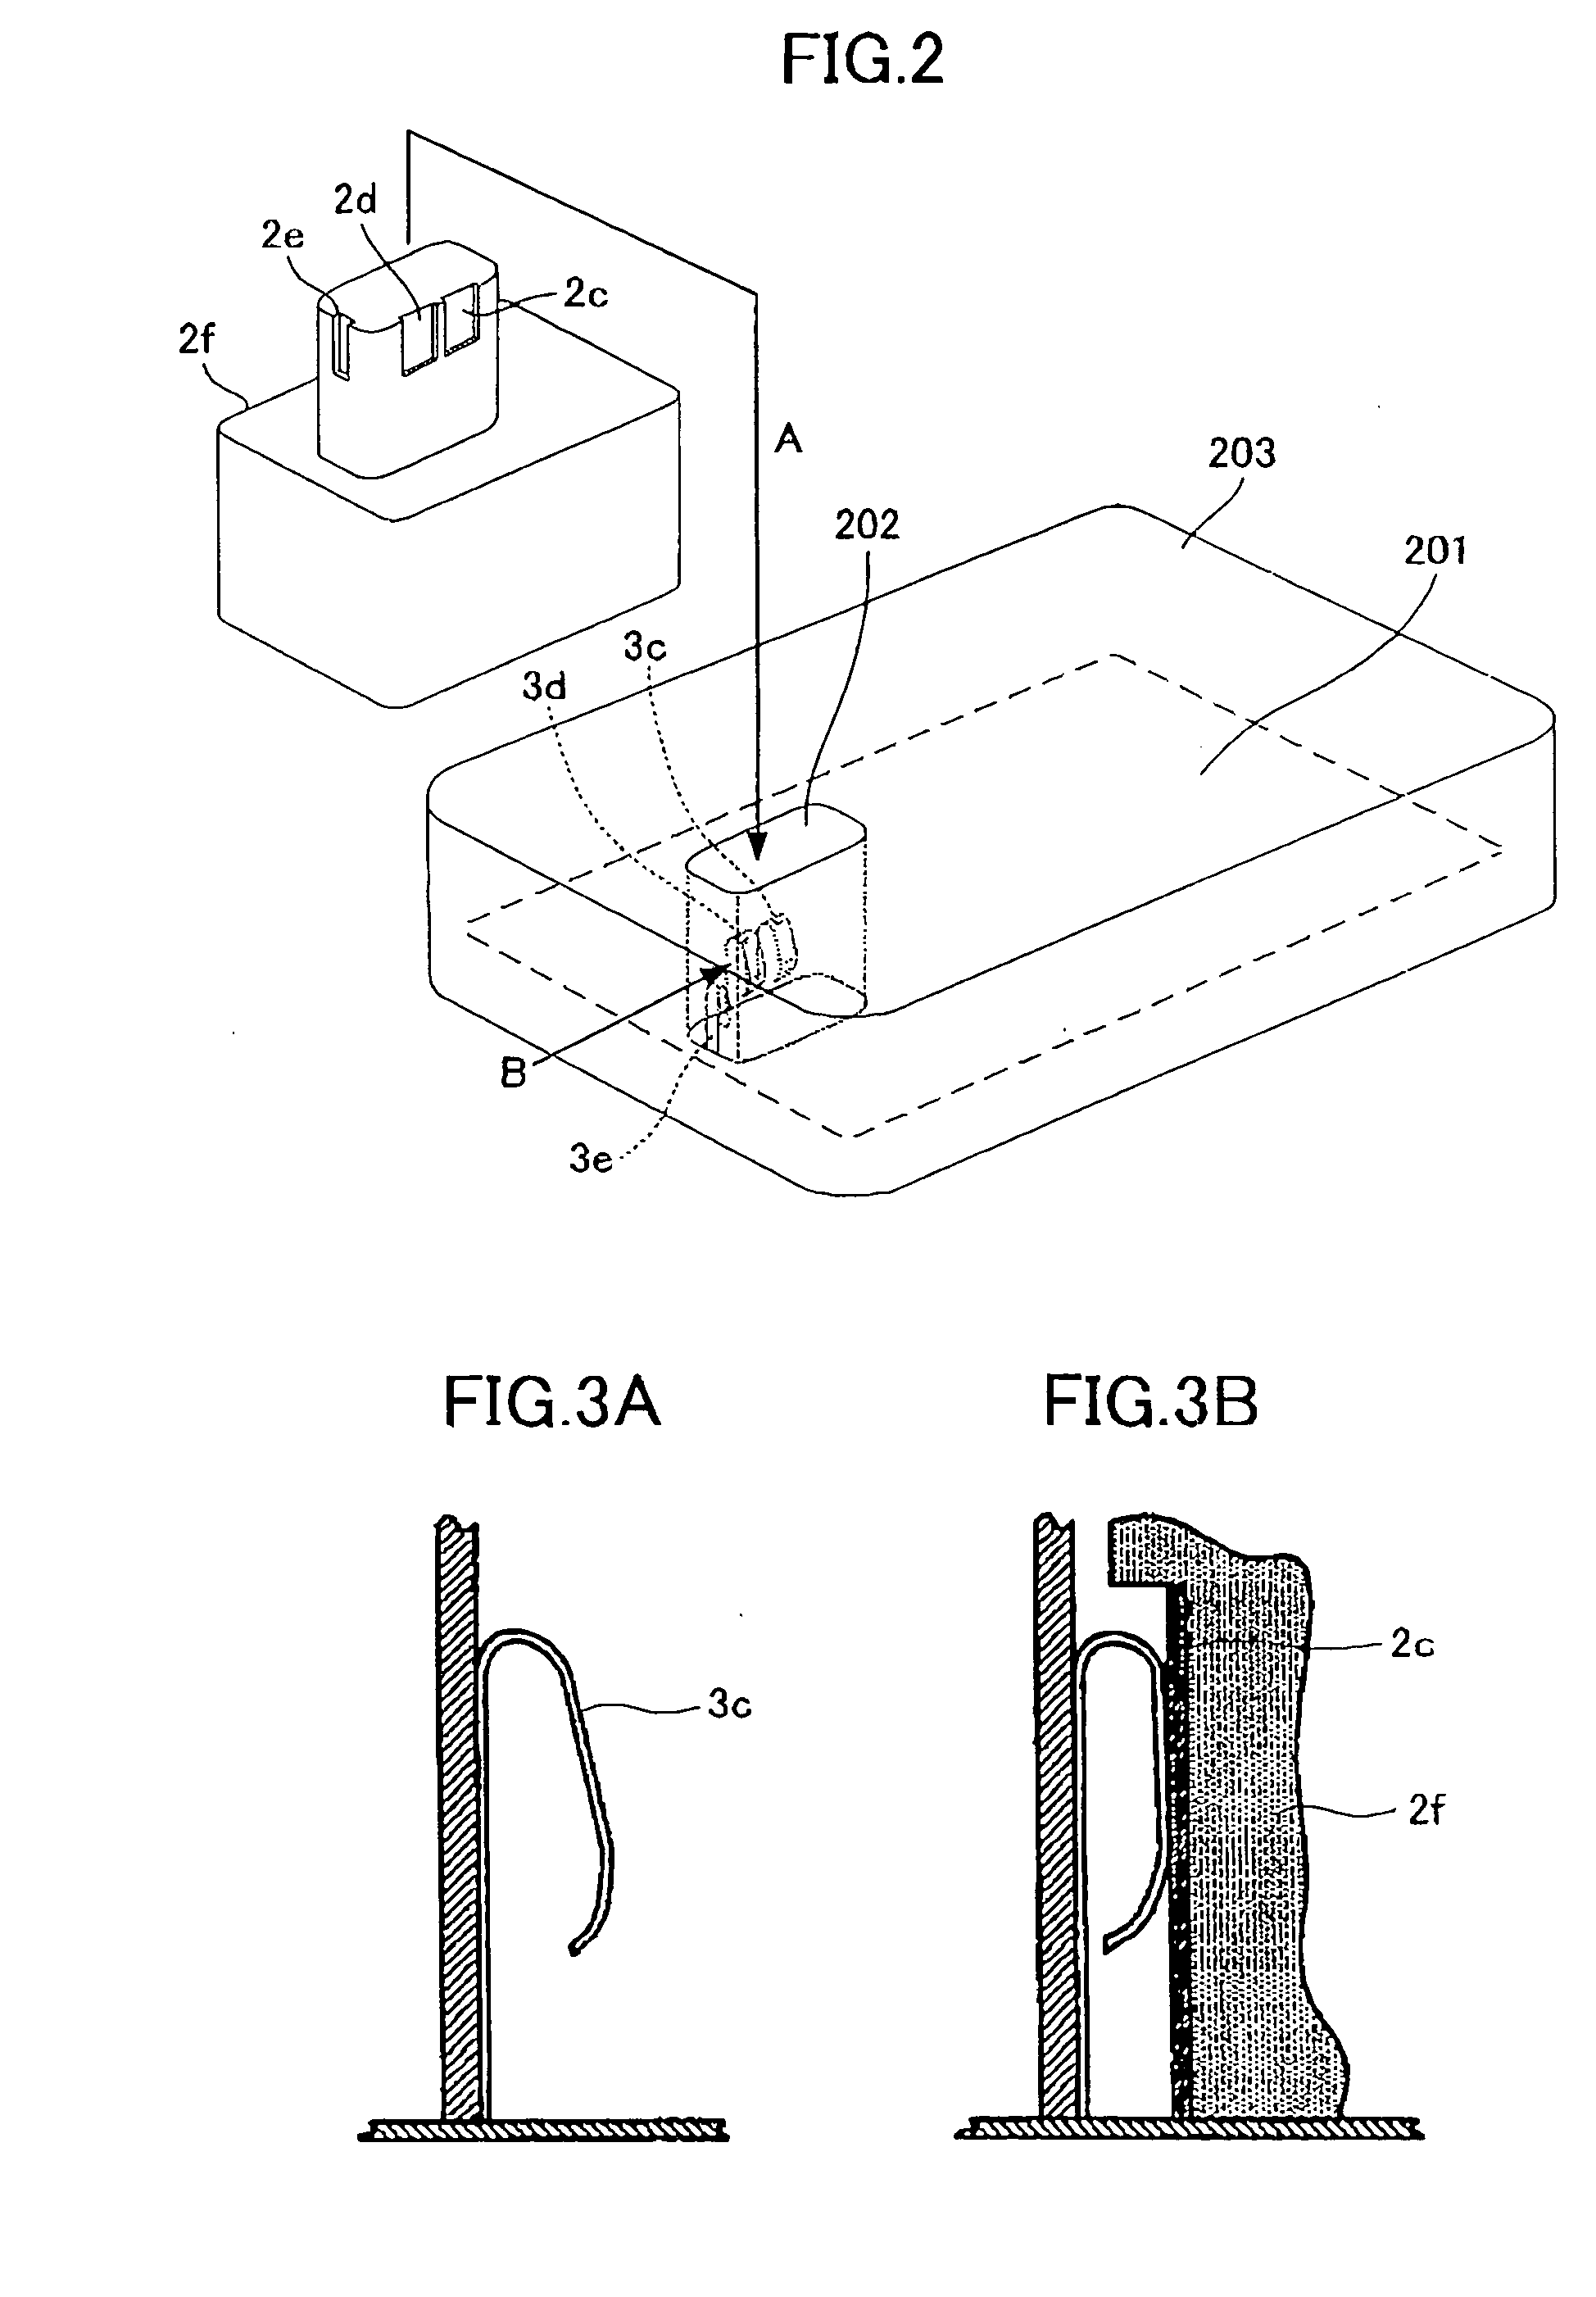 Battery charger capable of accurately detecting battery temperature for full charge determination